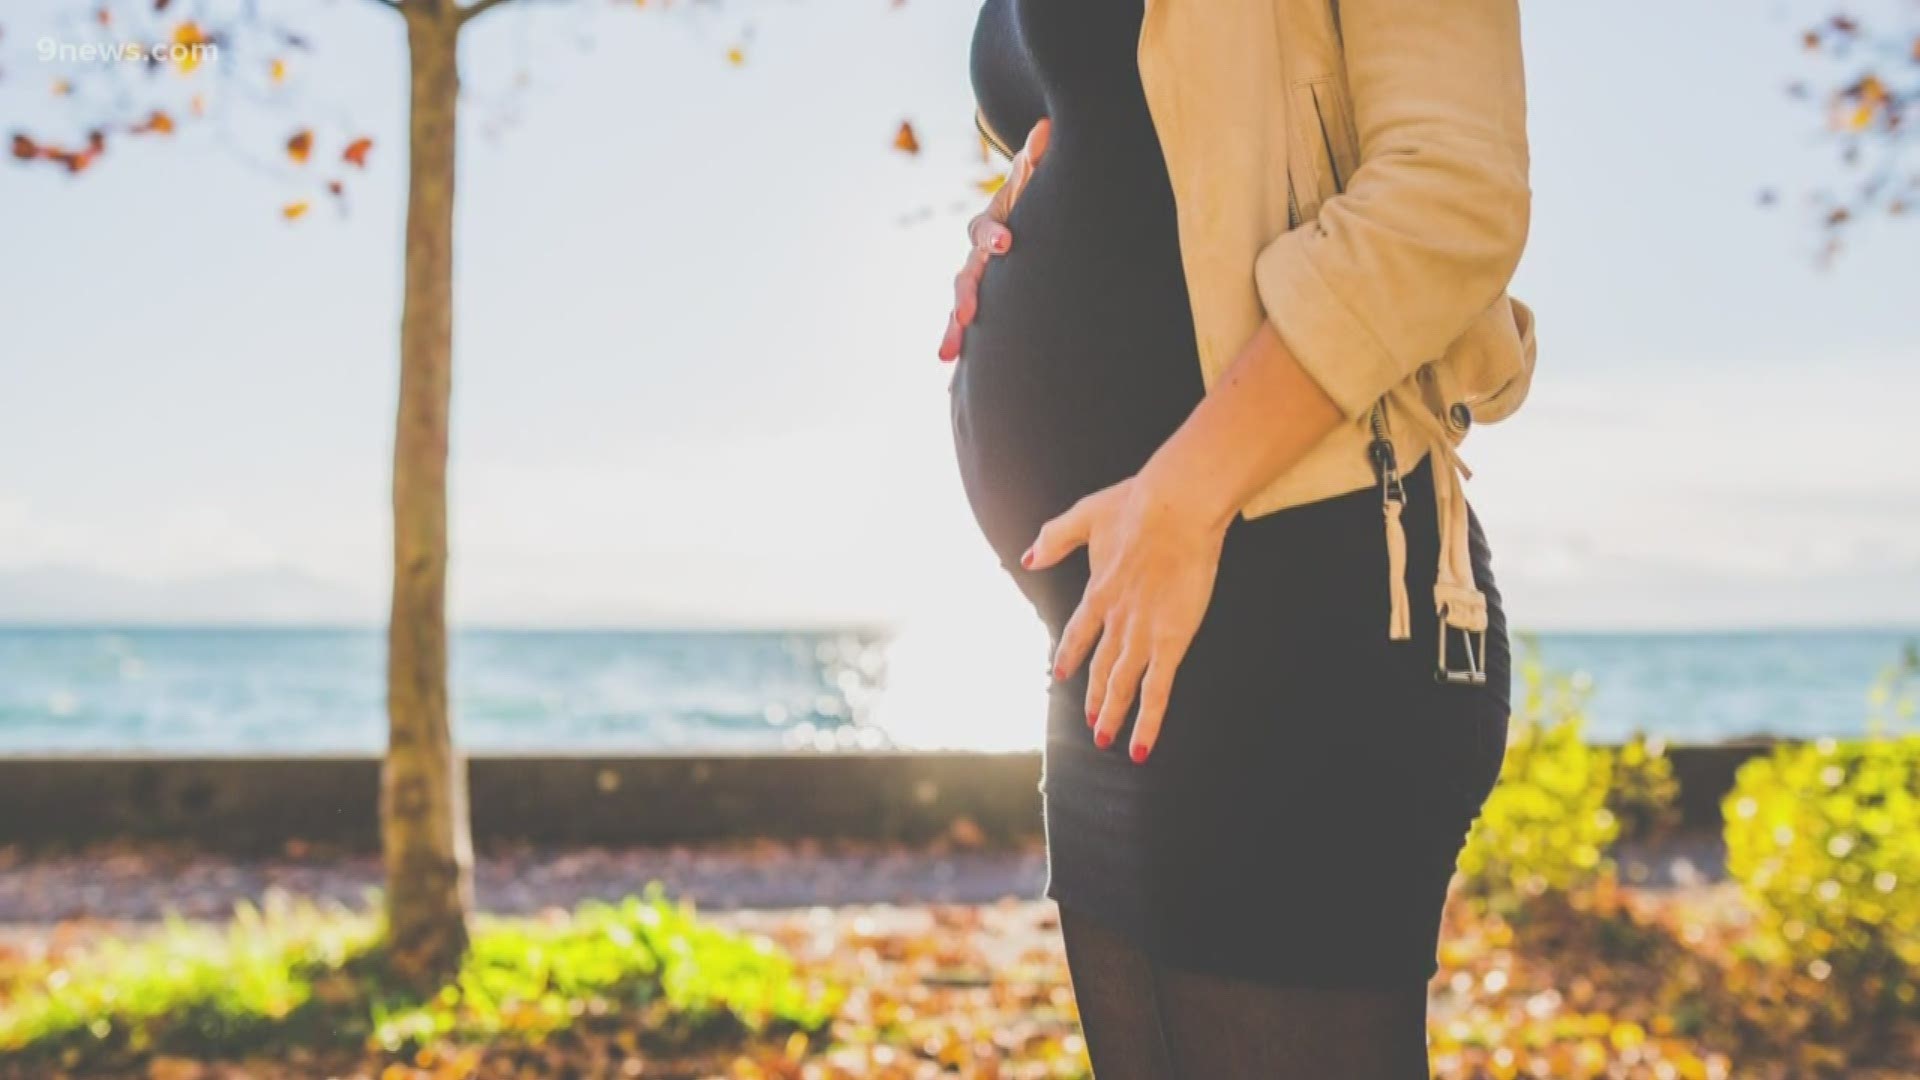 We've been getting a lot of questions about the new strain of coronavirus and how it could impact kids and pregnant woman. We took your concerns to the experts.